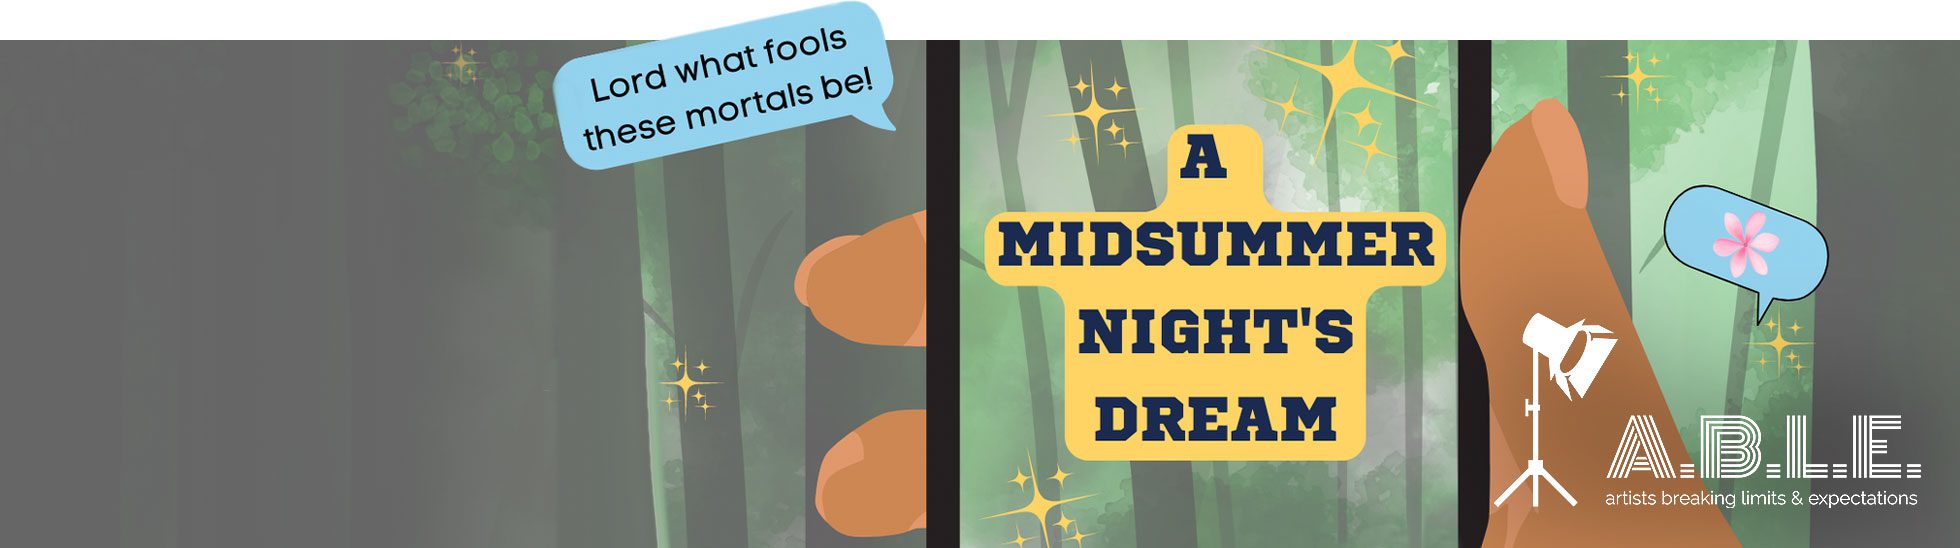 ABLE's Production of A Midsummer Night's Dream at Navy Pier Wide Banner Poster